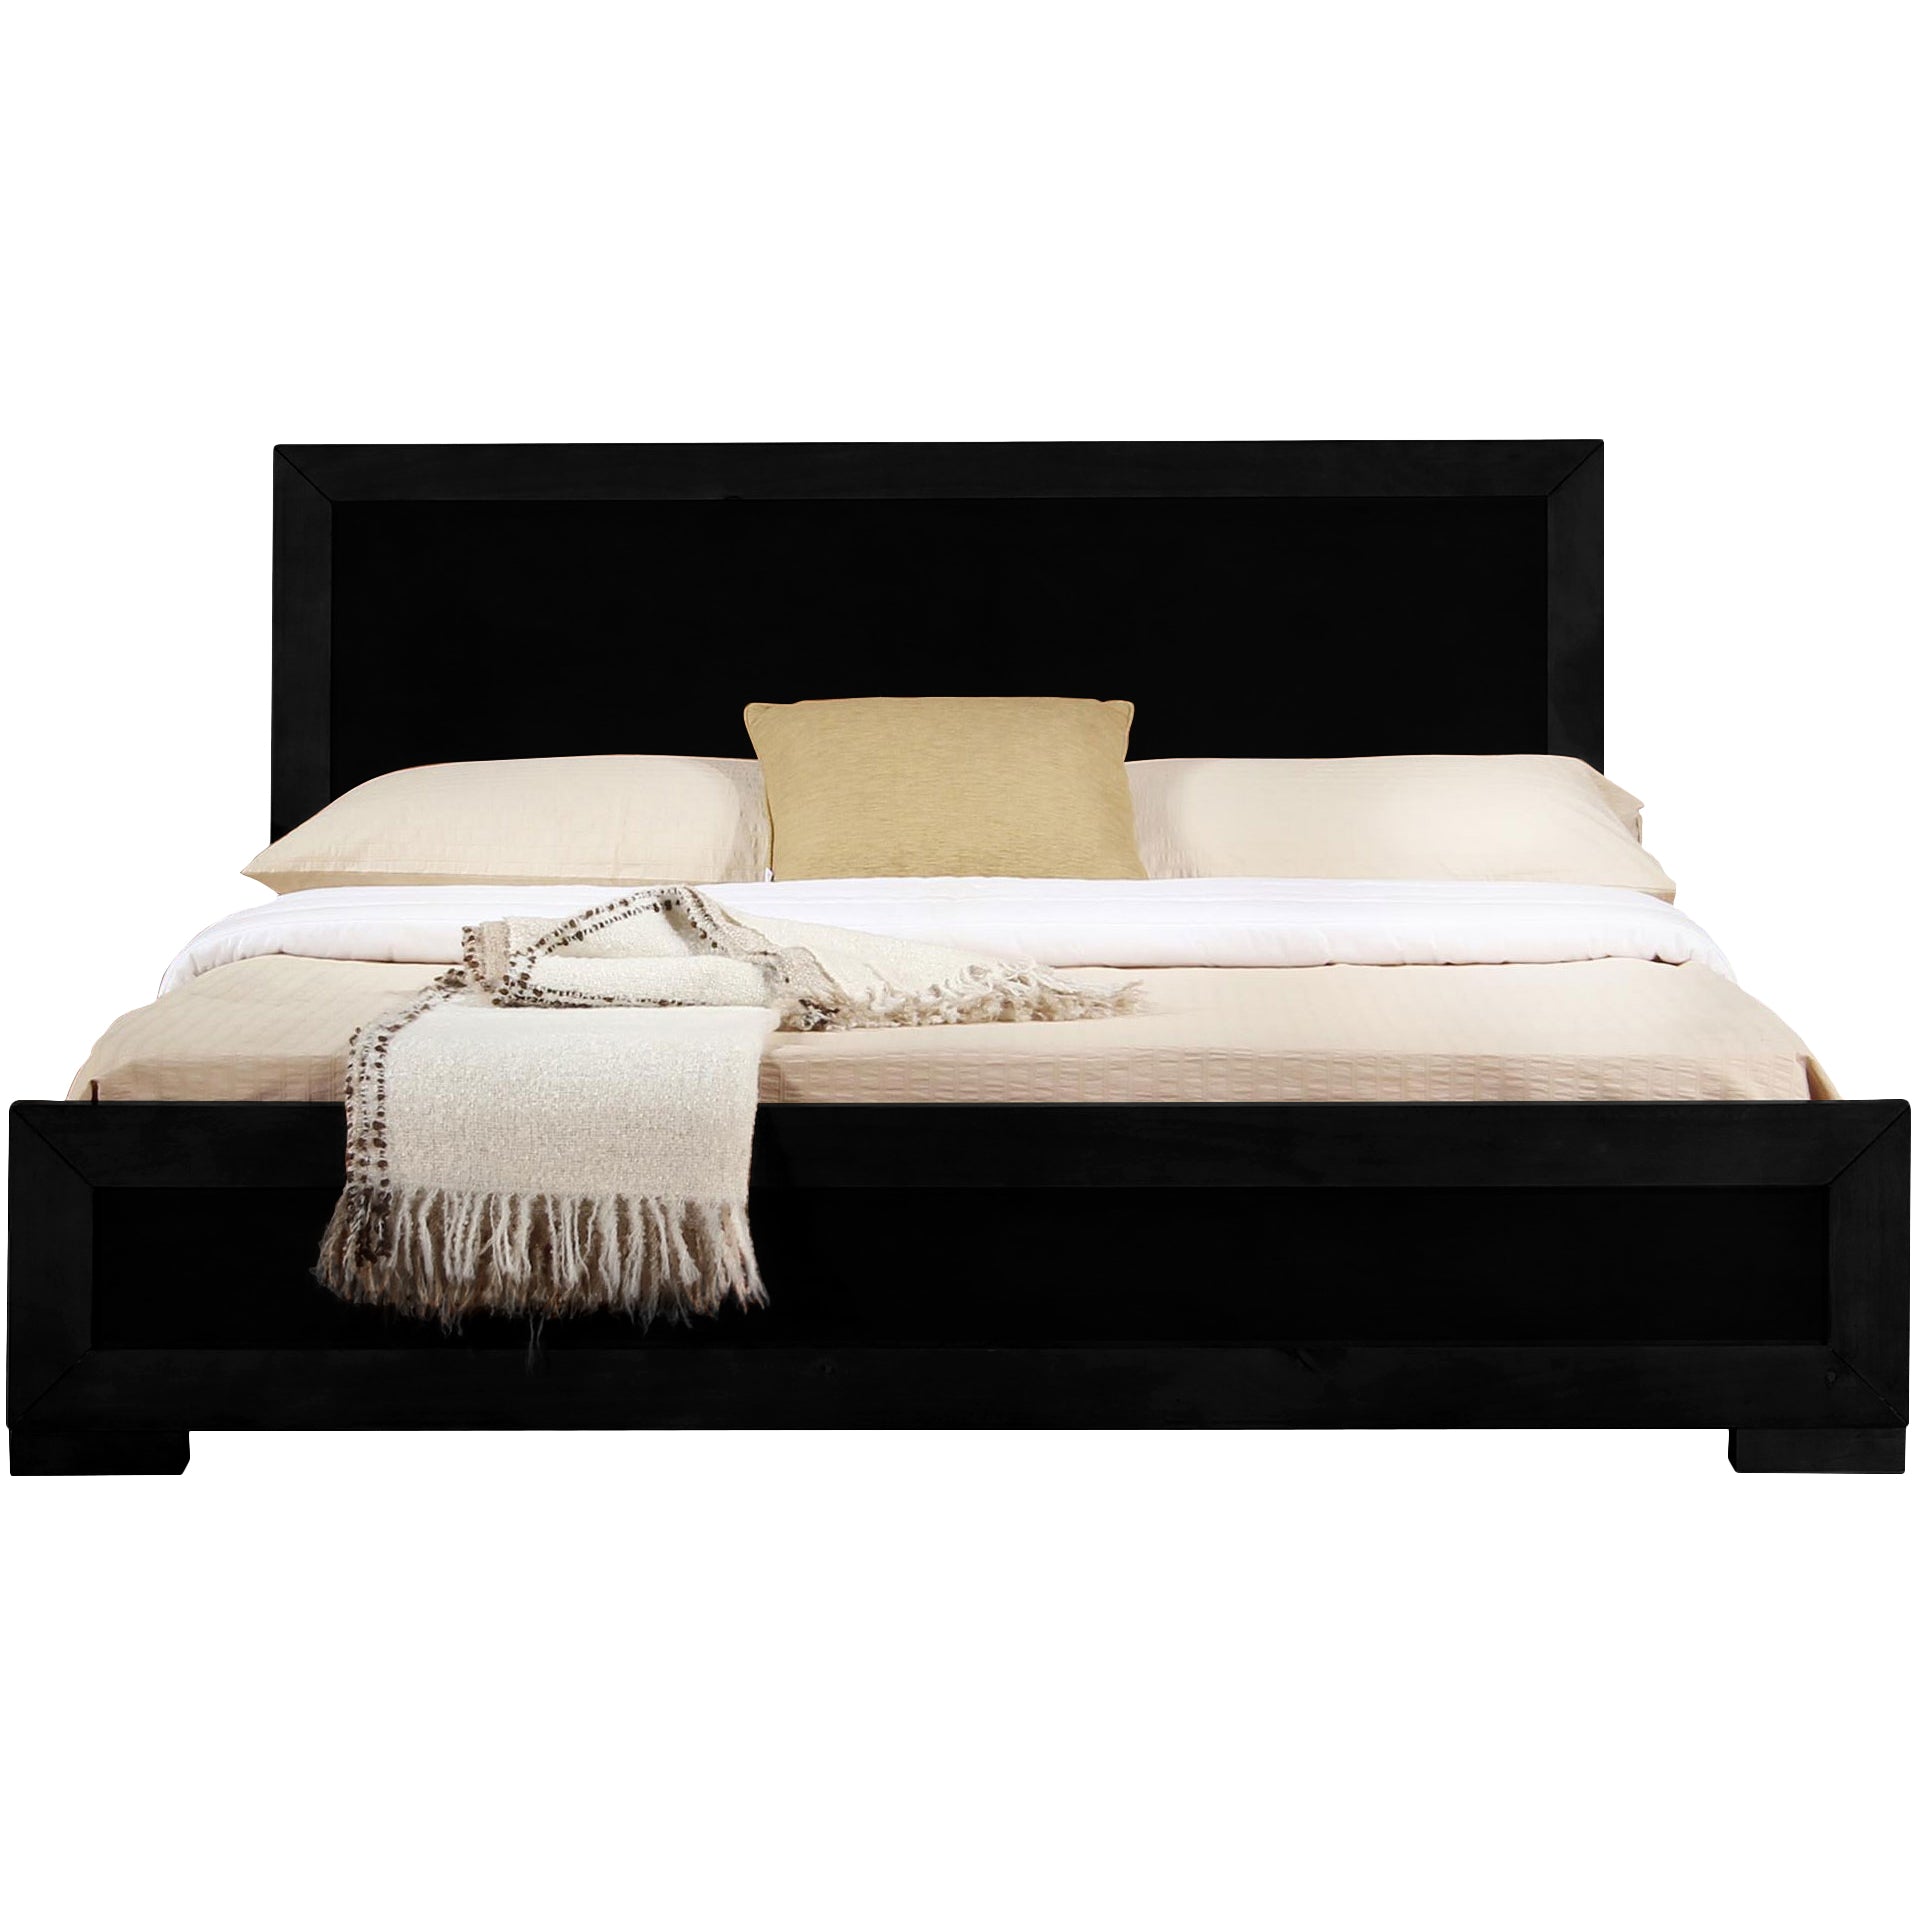 Moma Black Wood Platform King Bed With Two Nightstands